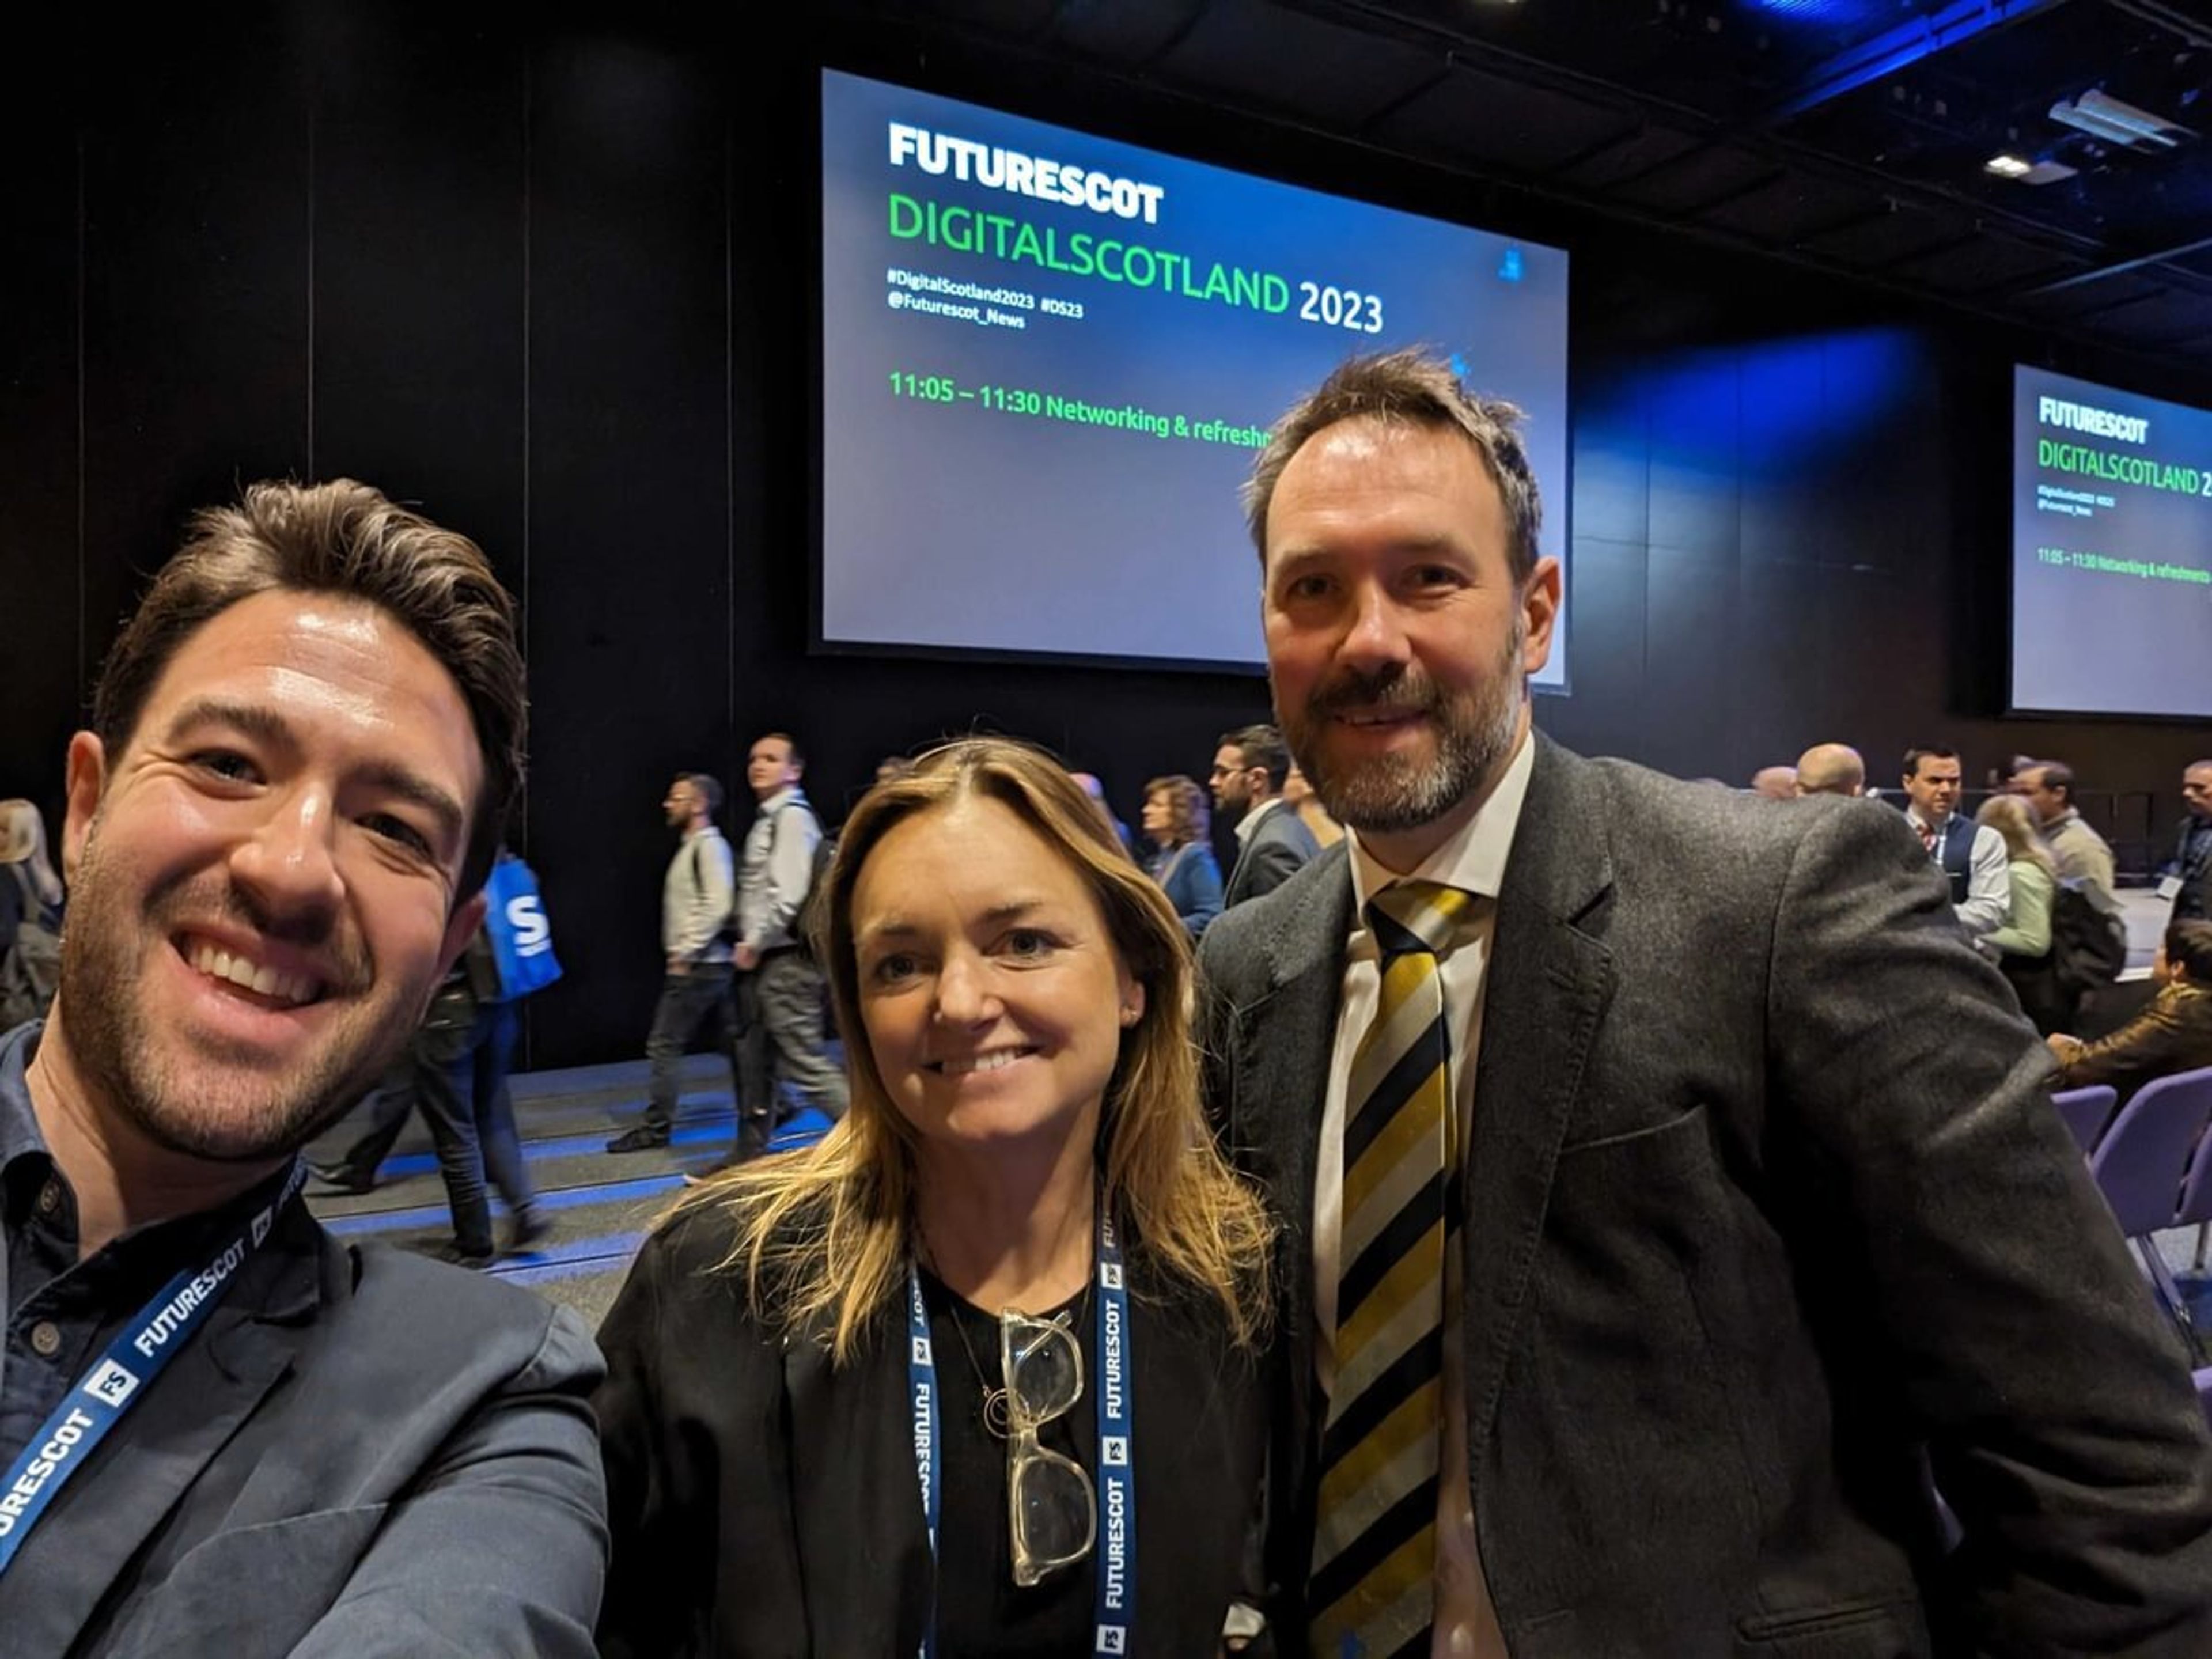 Three people posing for a selfie at a conference with a big screen behind them that reads "Digital Scotland 2023"